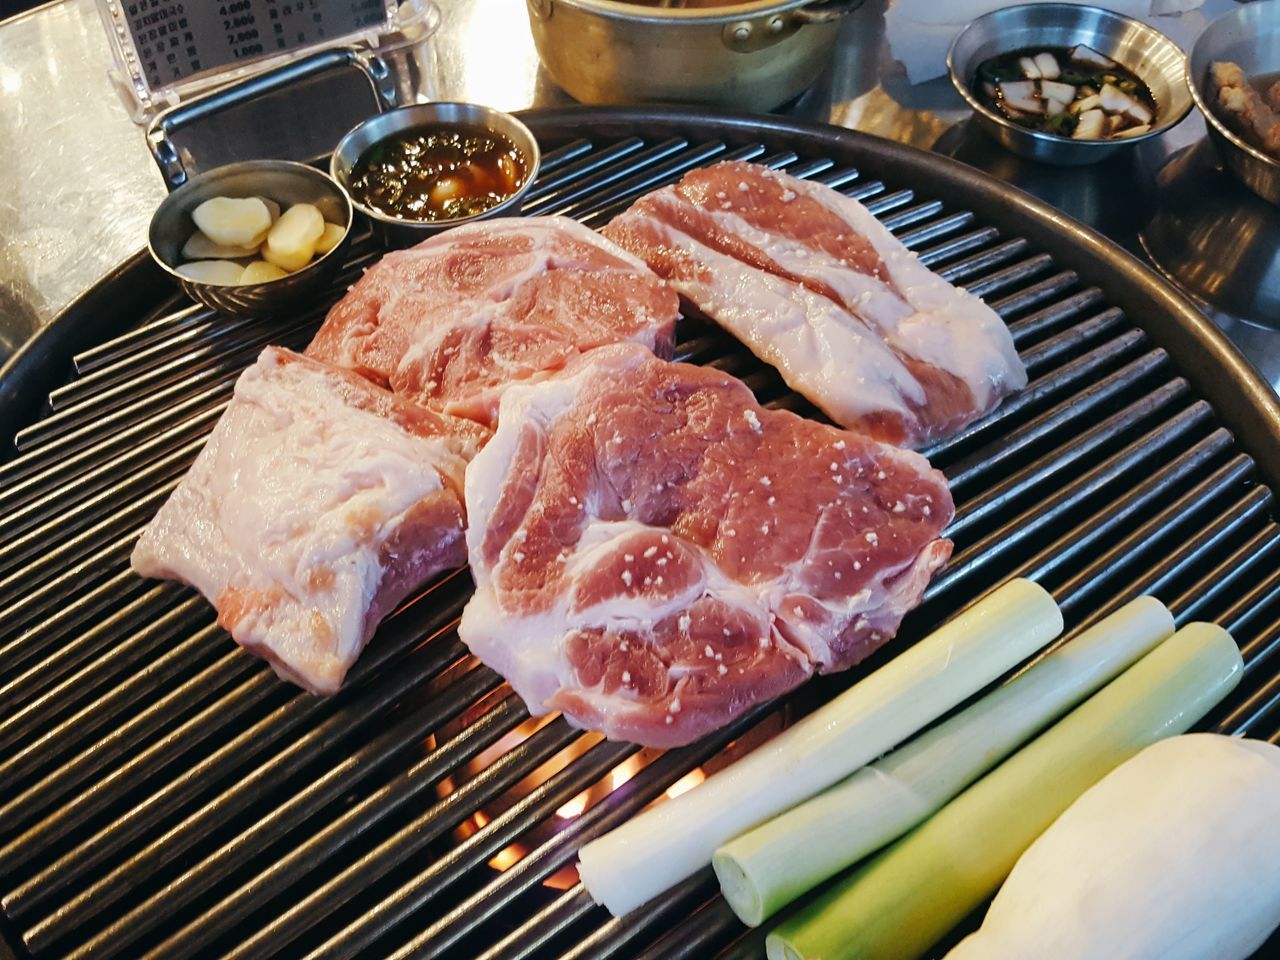 meat, food, food and drink, raw food, preparation, freshness, barbecue, beef, no people, healthy eating, pork, day, close-up, outdoors